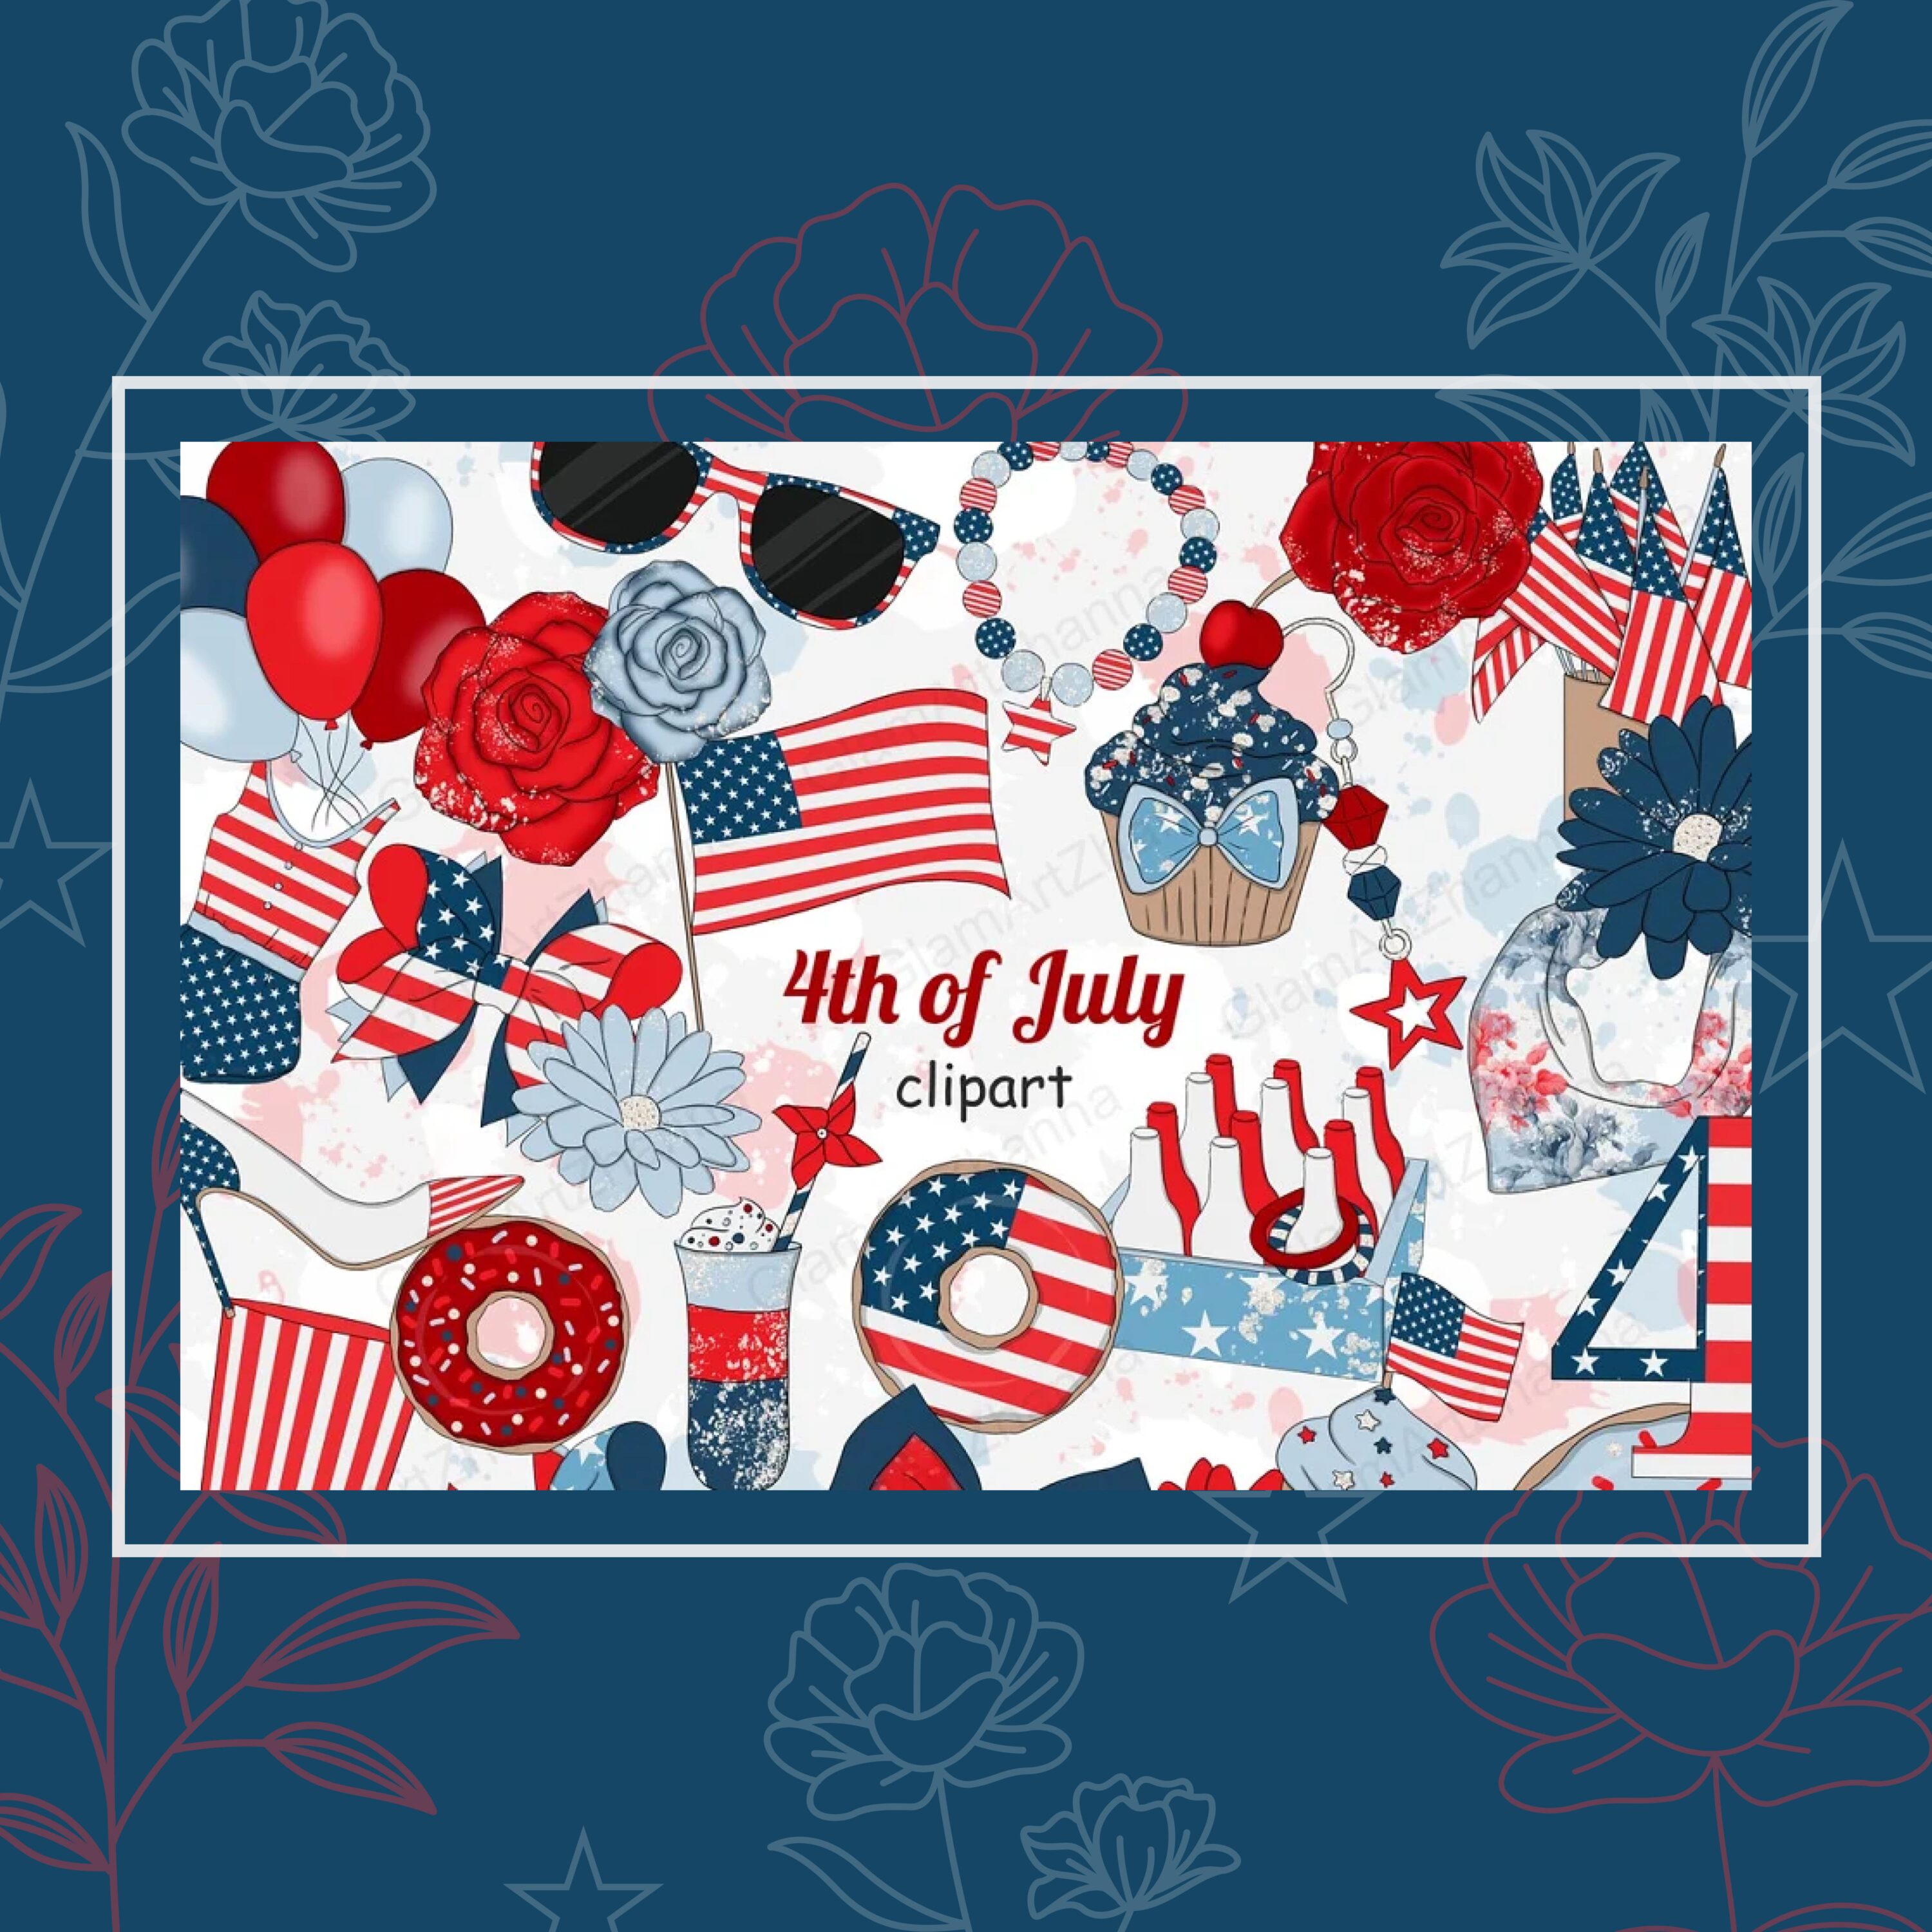 4th of july clipart.